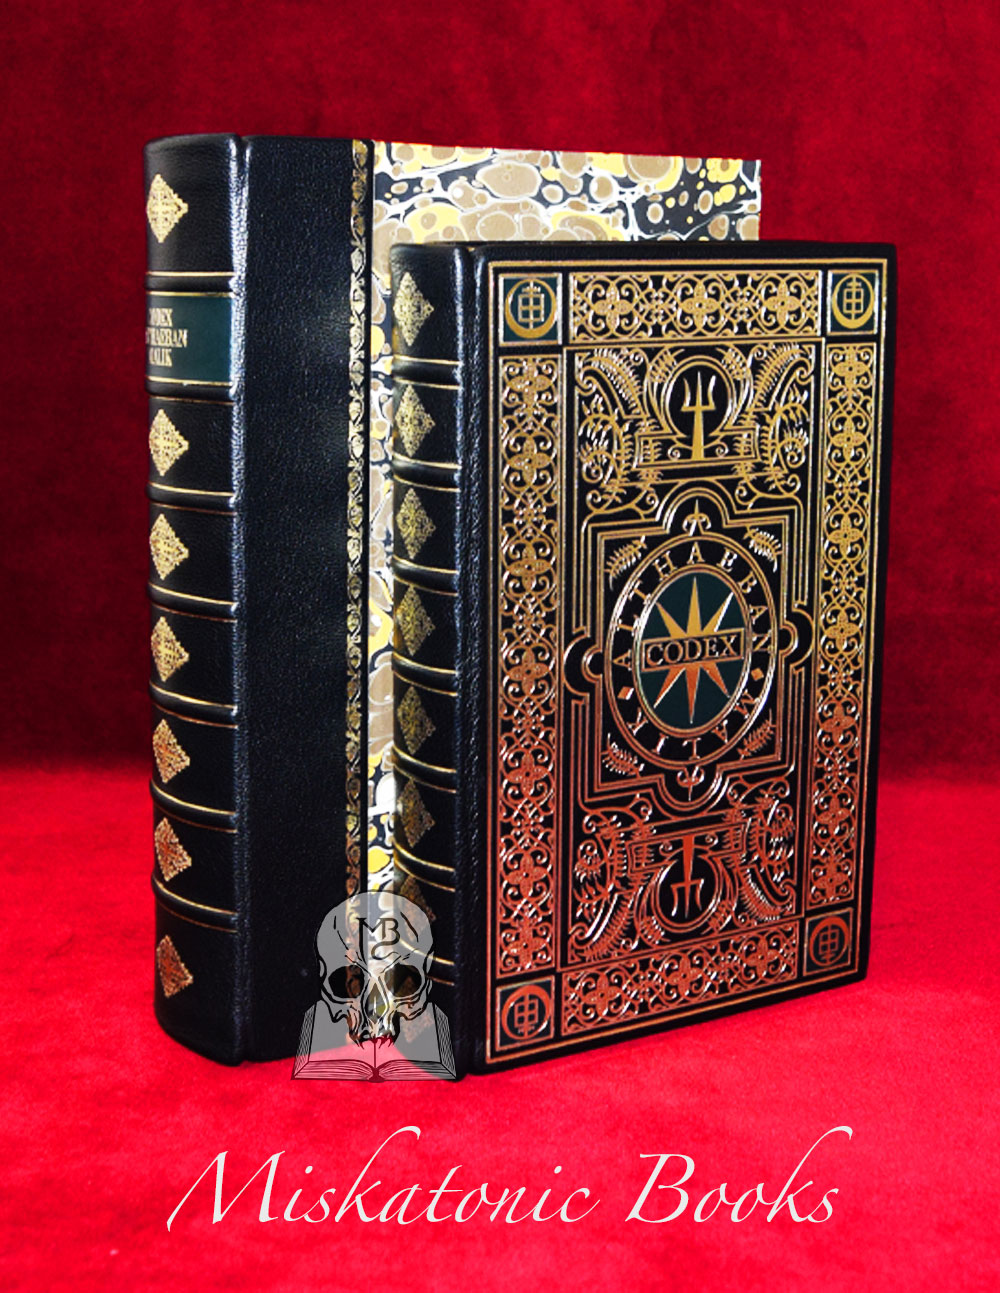 CODEX ALTHAEBAN MALIK: The Book of Aberrations by Peter Hamilton-Giles - Deluxe Leather Bound Limited Edition Hardcover